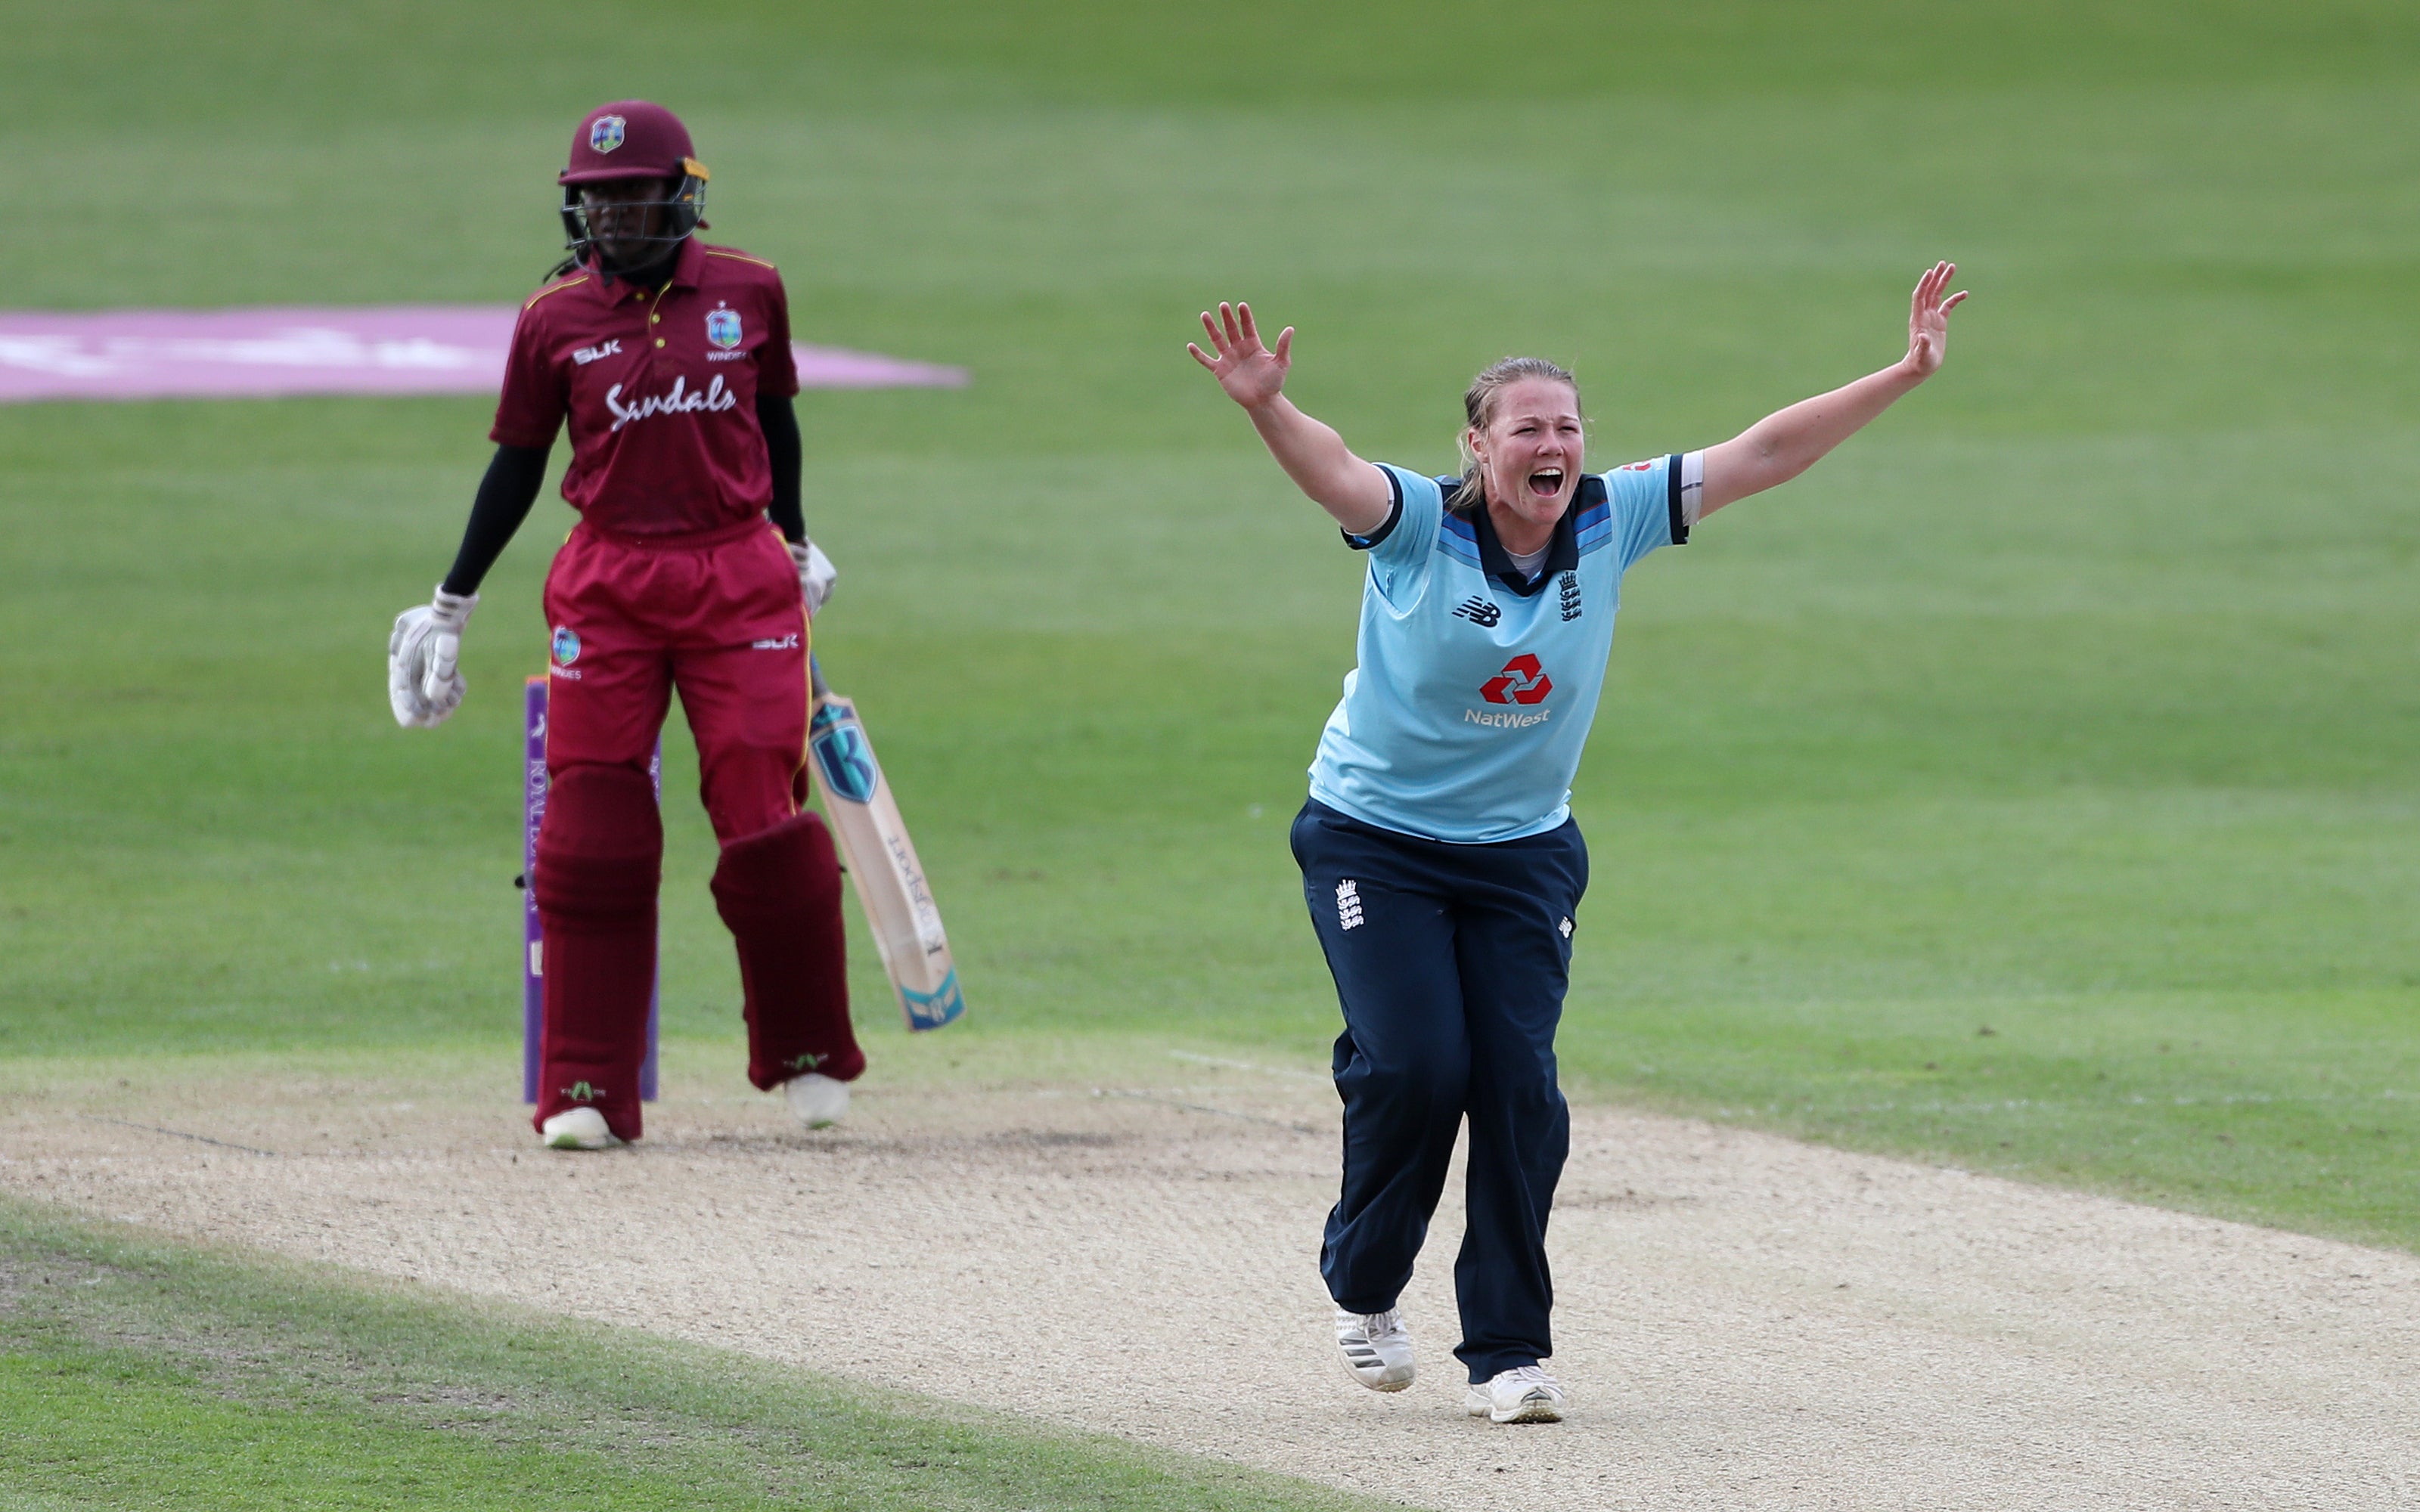 Anya Shrubsole believes England are a match for anyone (David Davies/PA).